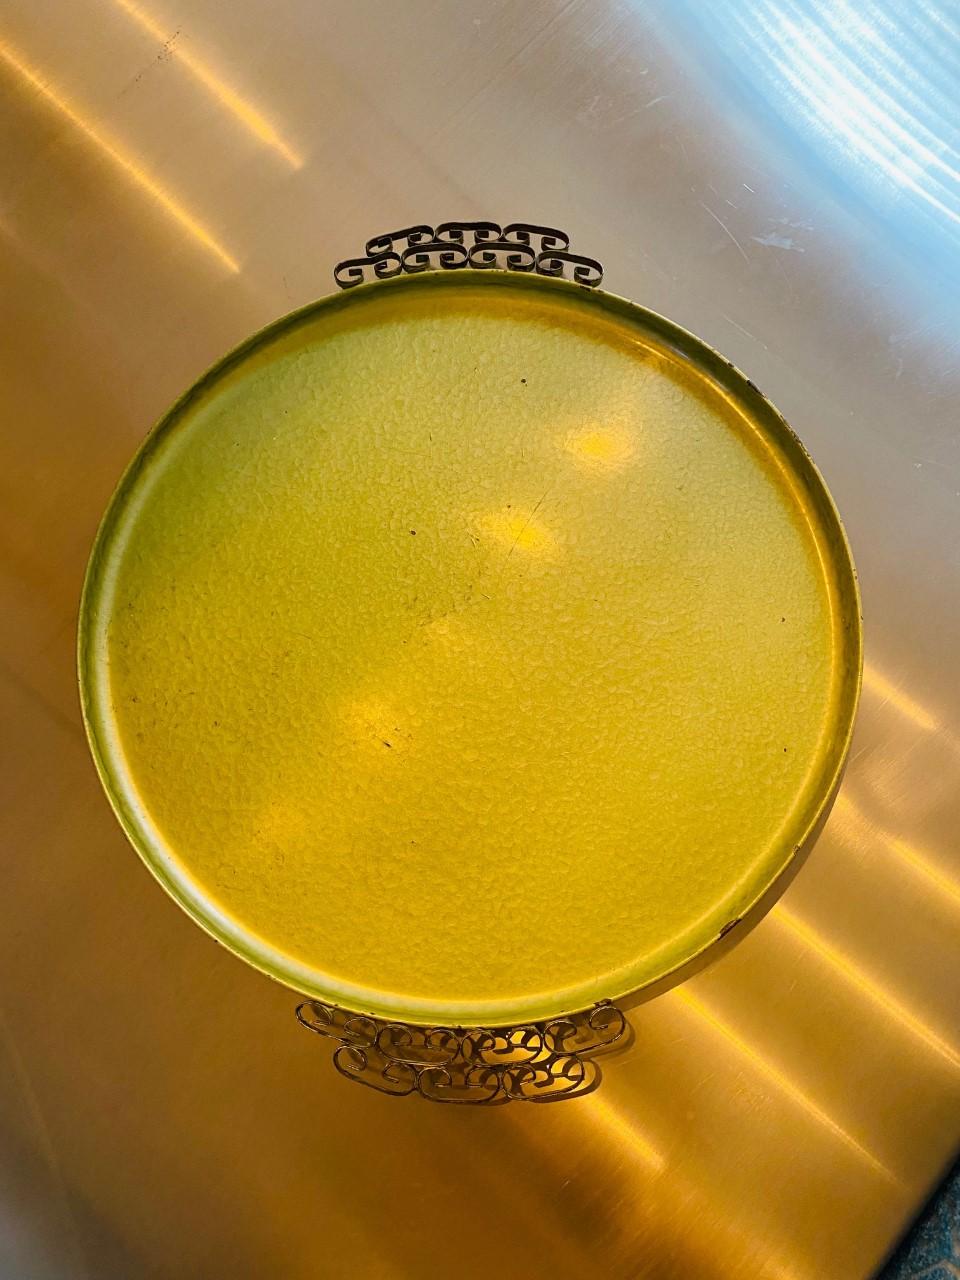 A piece of Southern California glamorous history, this vintage handmade Moire Glaze Kyes tray is composed of hammered metal with an enamel finish and double brass handles with ornate Greek key design. This beautiful piece is circular and with a